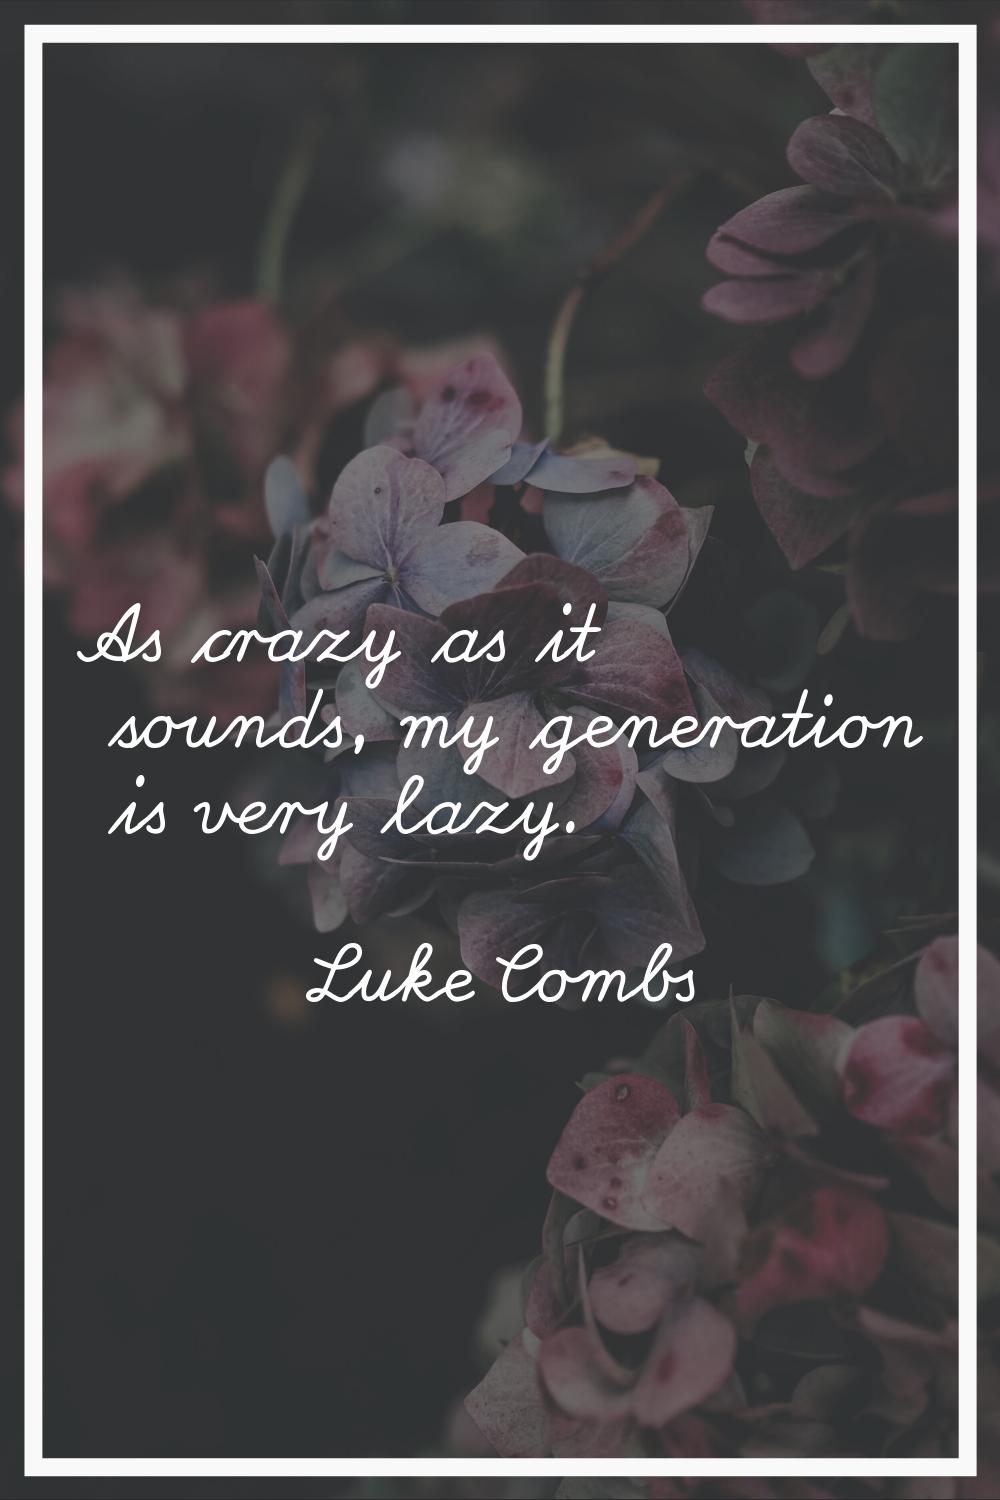 As crazy as it sounds, my generation is very lazy.